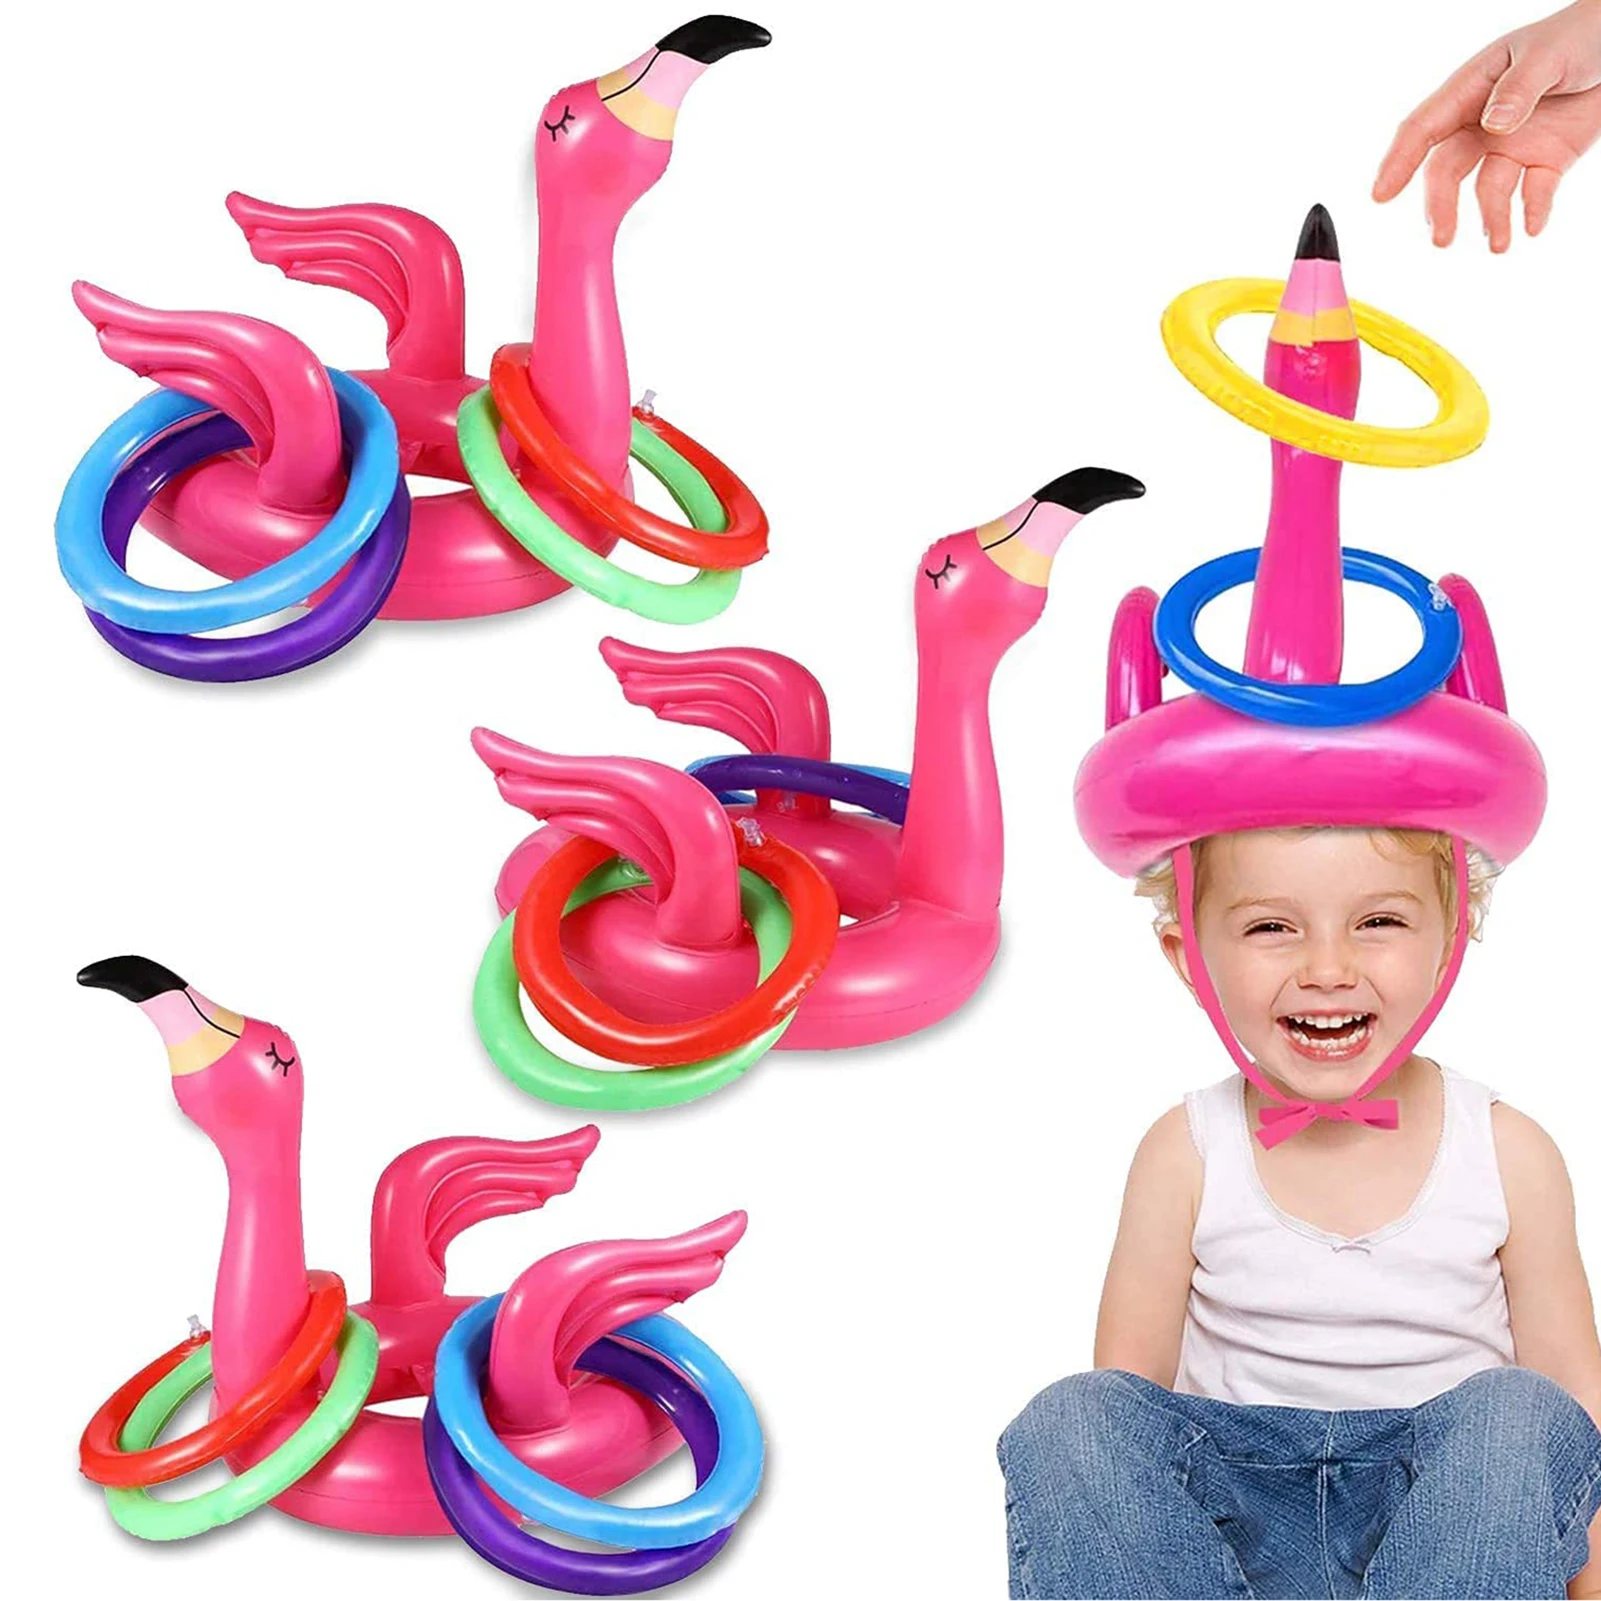 Portable Iatable Flamingo Head Hat With 4Pcs Toss Rings Water Game For Family Party Pink PVC Material Outdoor Pools Fun Toys hand helicopter saucers launcher christmas birthday party gifts outside games catching flying disc fun backyard family activitiy